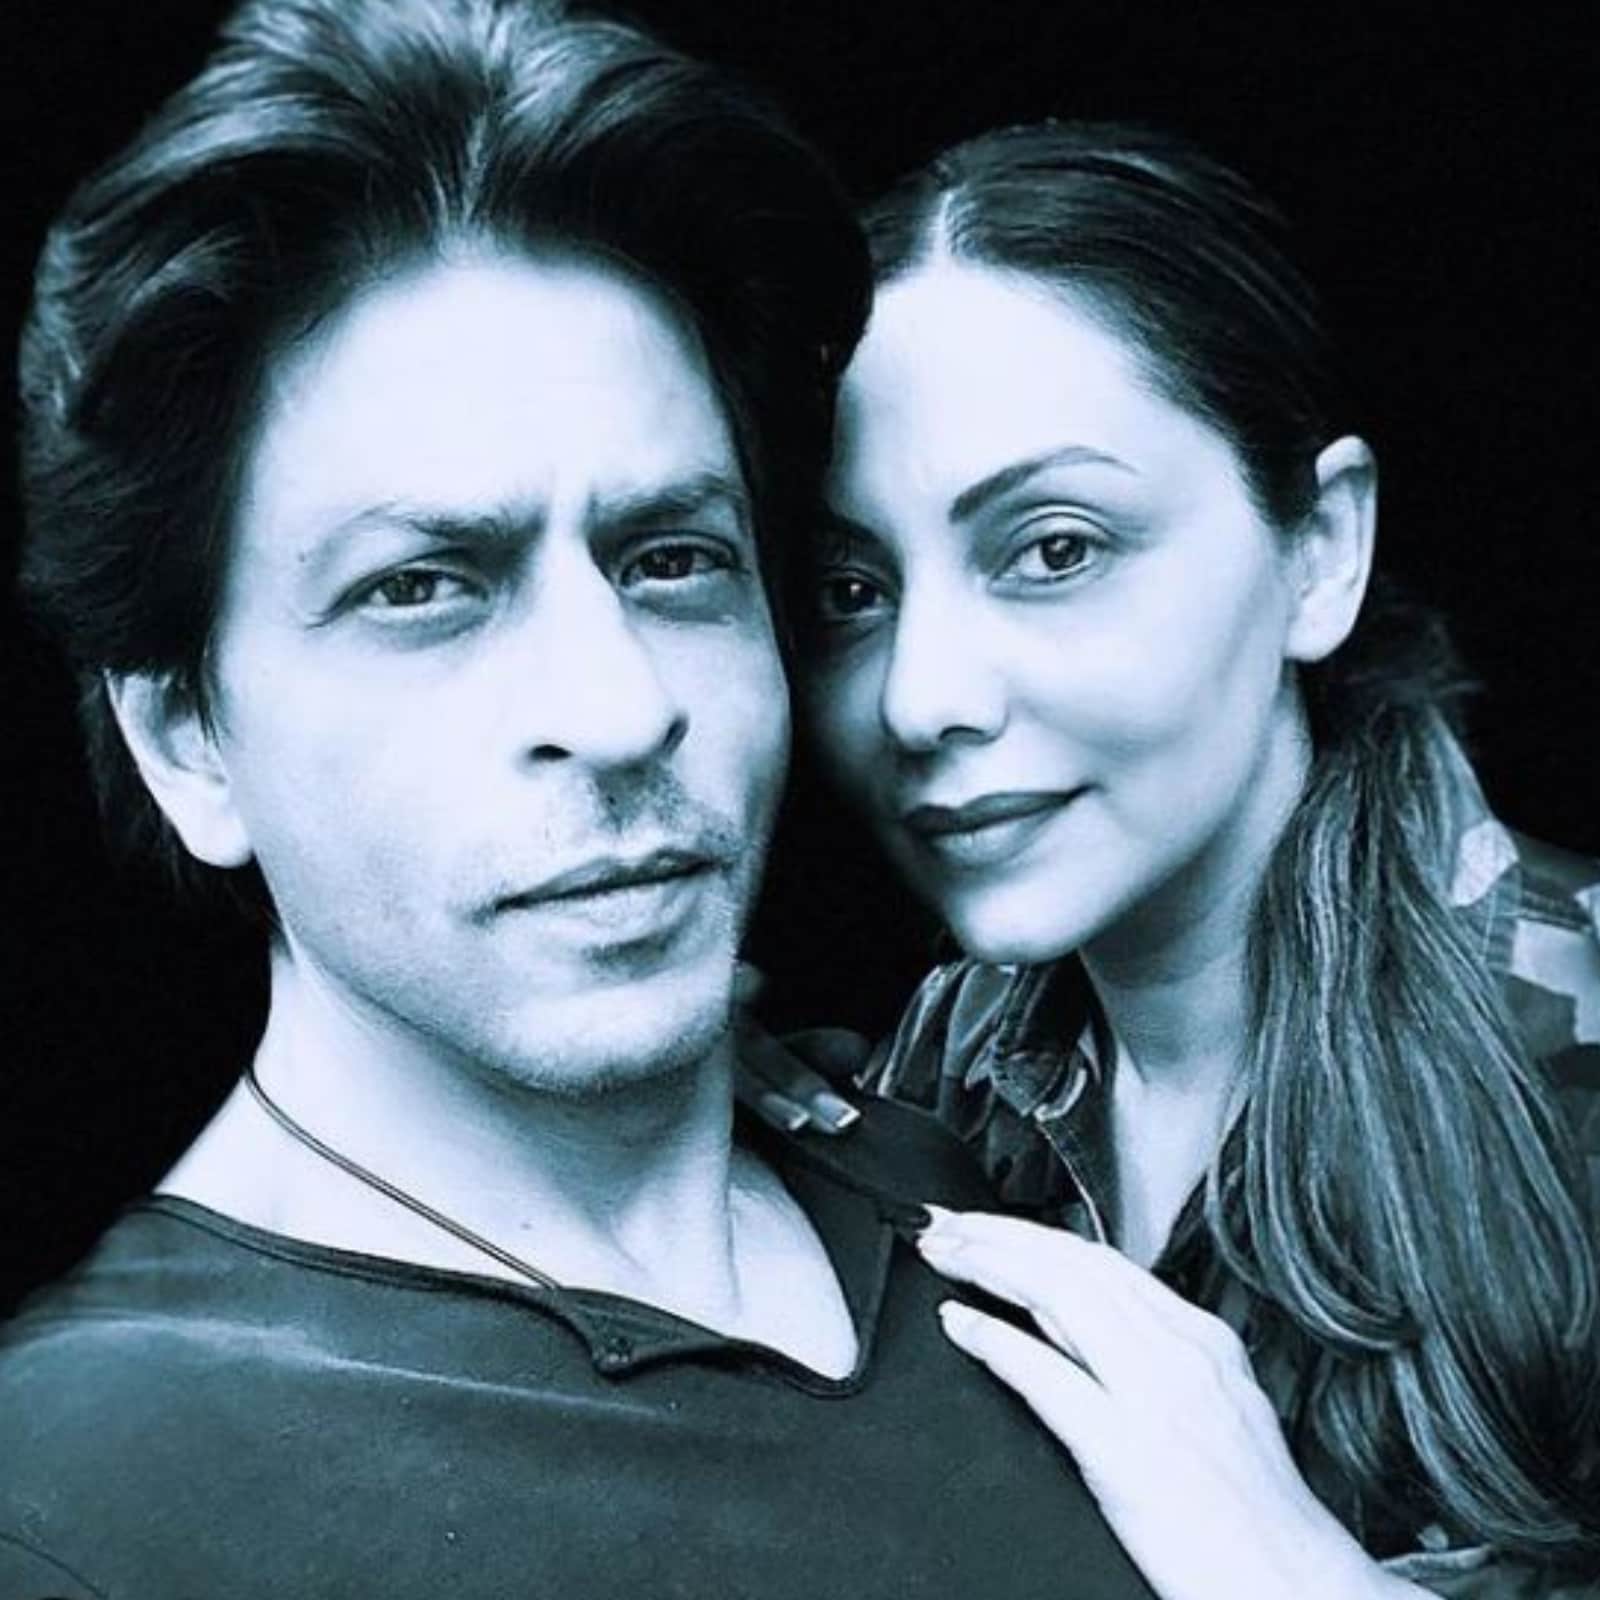 Gauri Khan spoke about Shah Rukh in the new episode of Koffee With Karan.